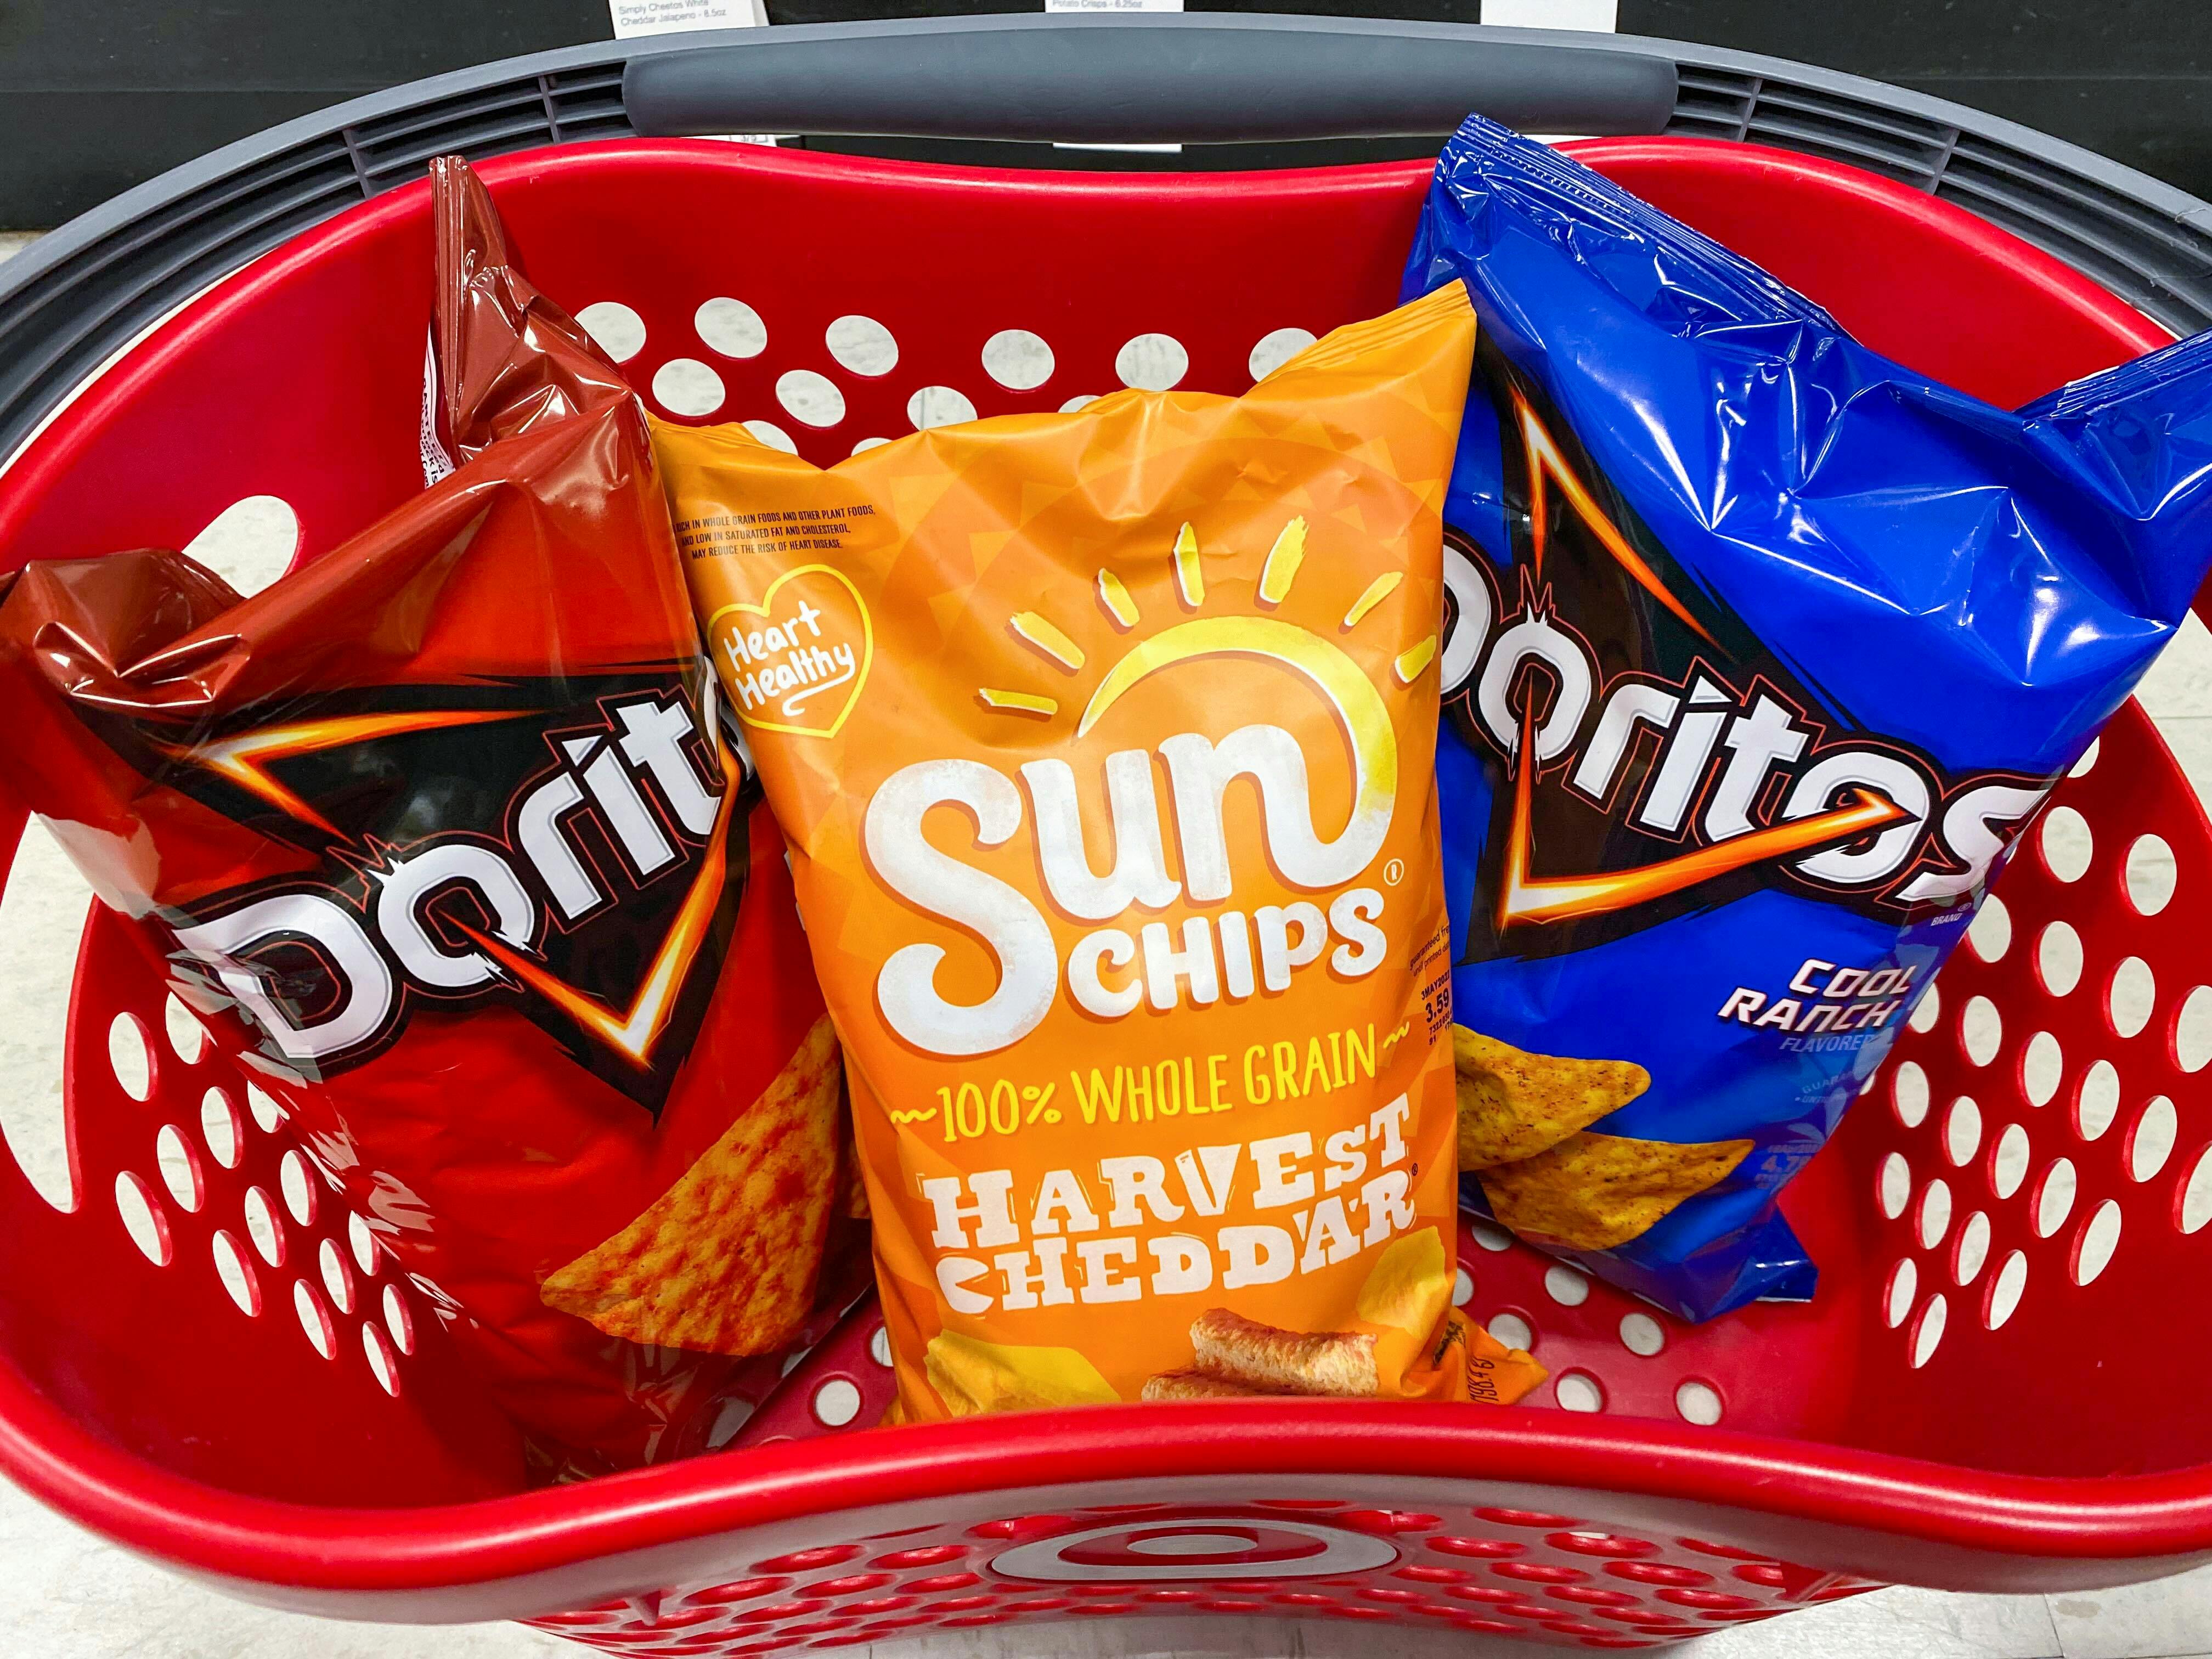 Doritos and Sun Chips in a Target basket